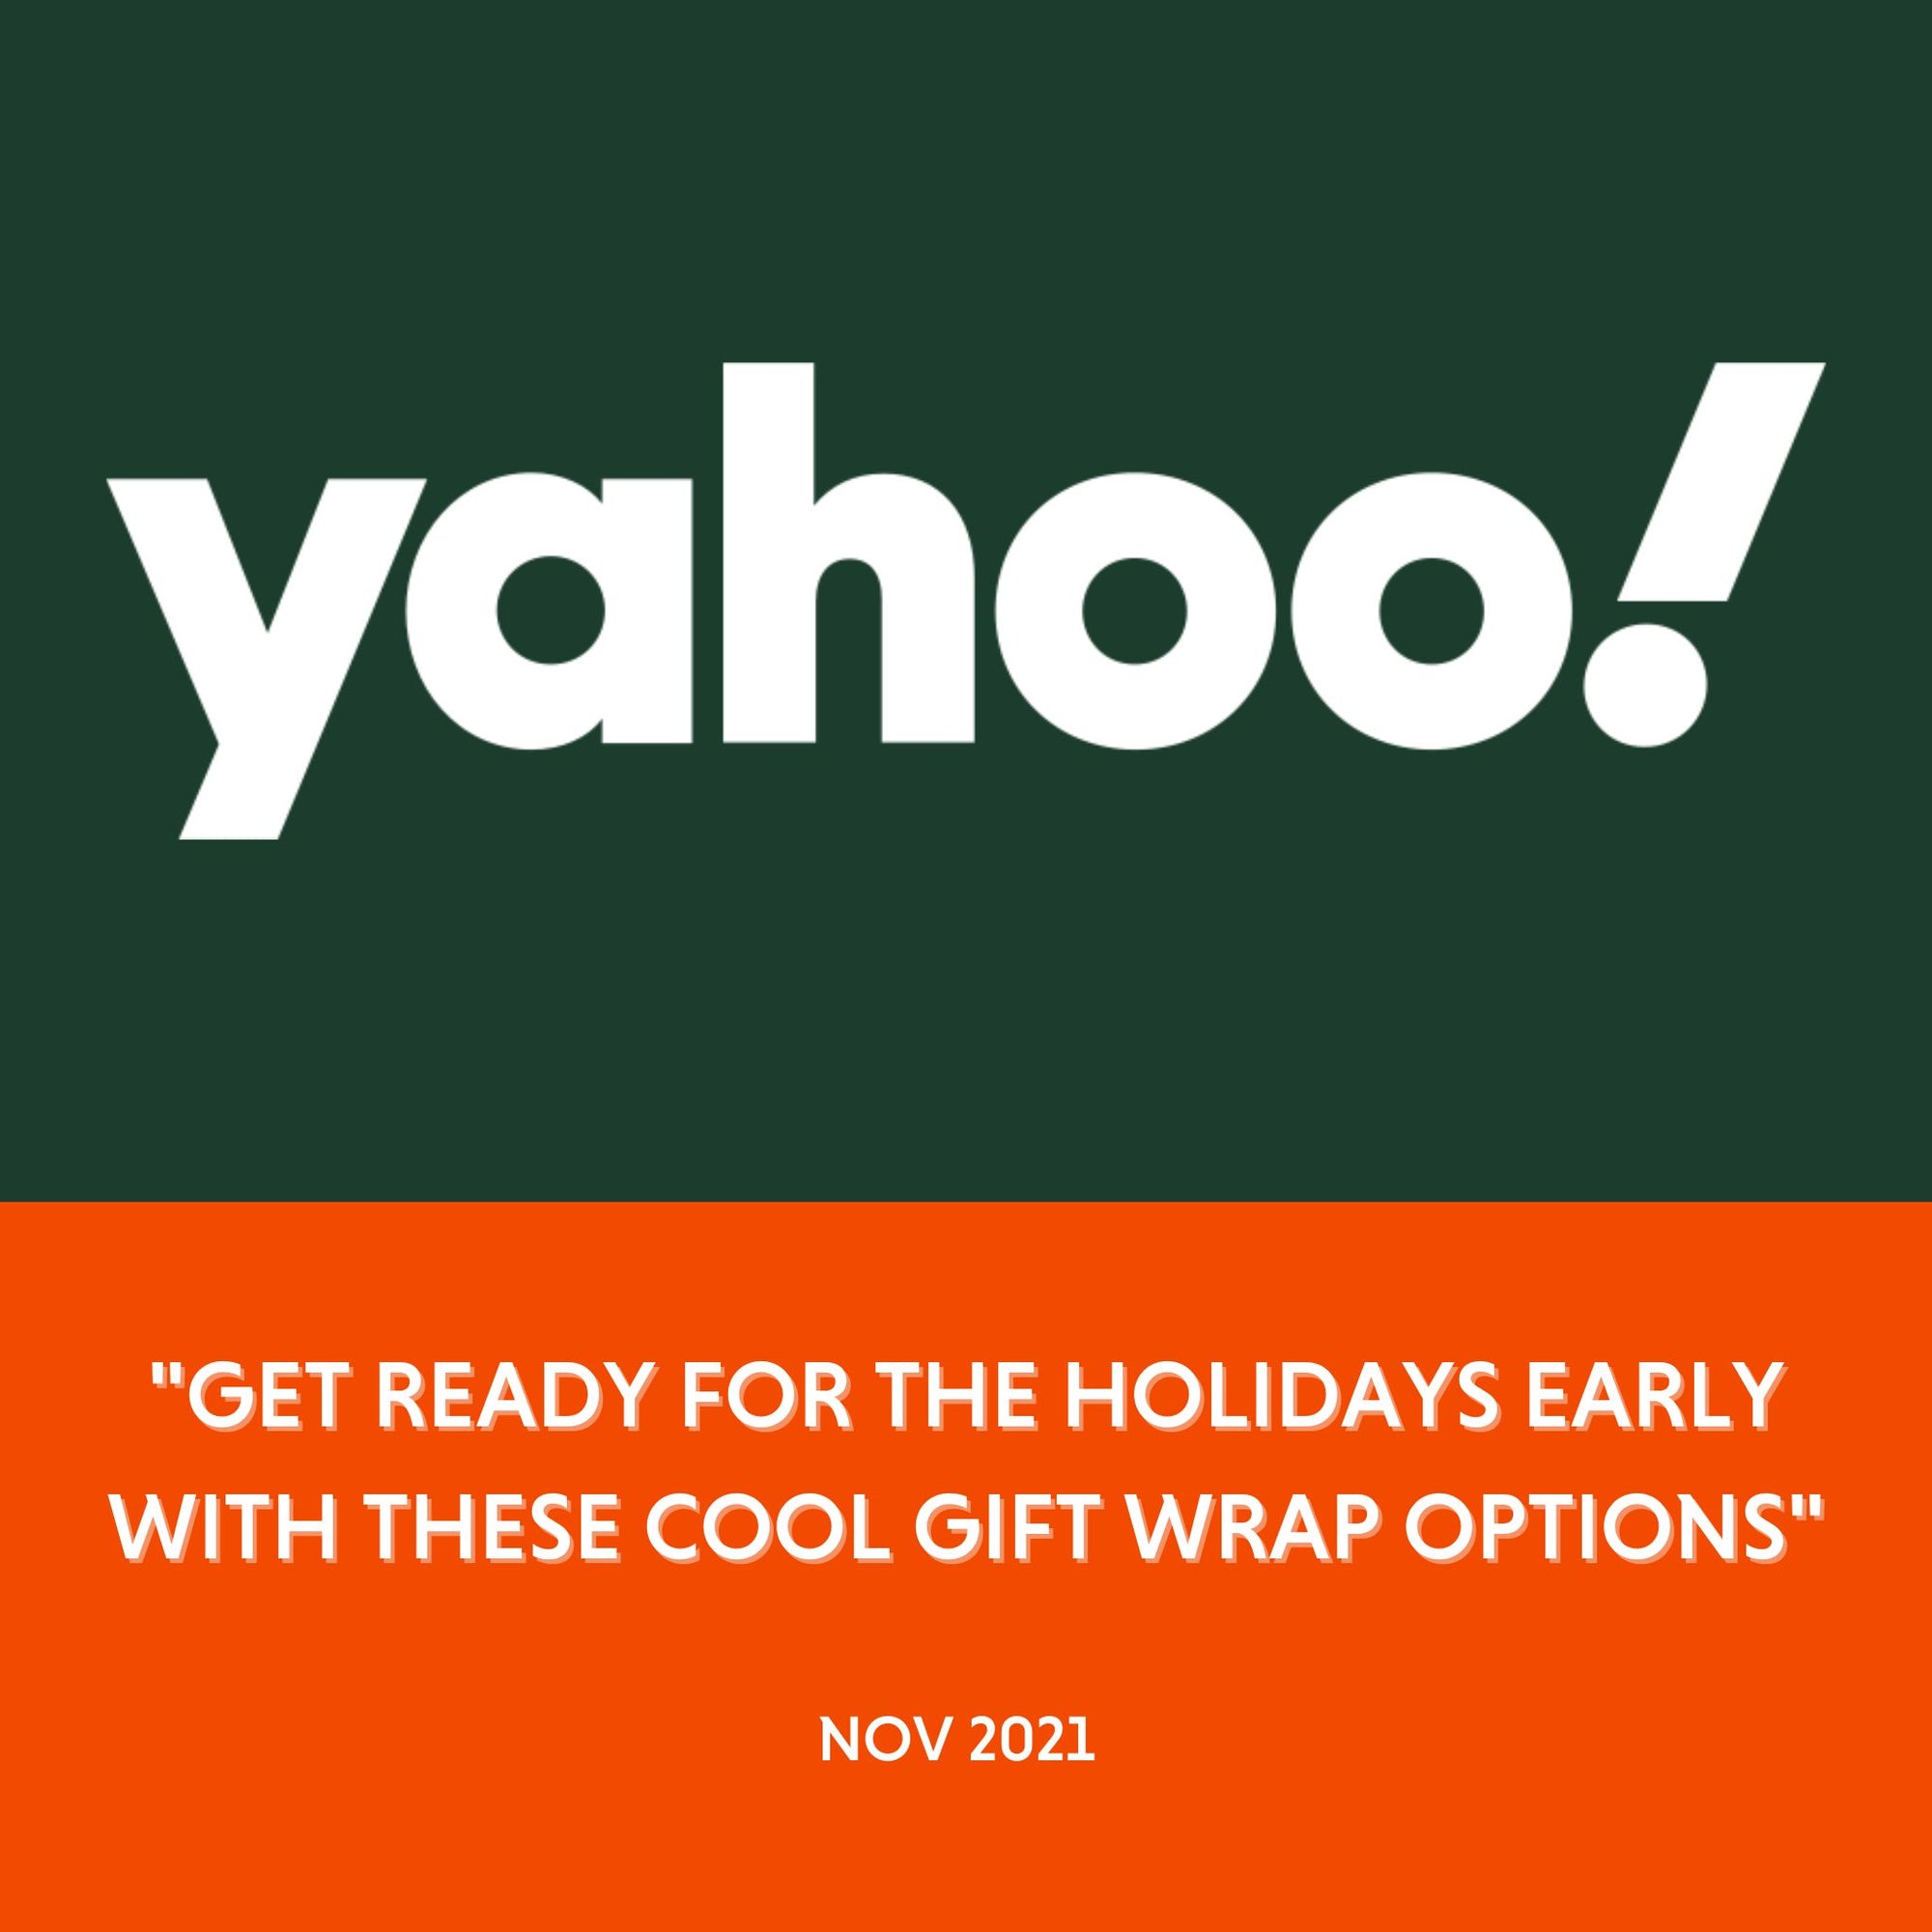 Yahoo - "Get Ready For The Holidays Early With These Cool Gift Wrap Options" -  Nov 2021